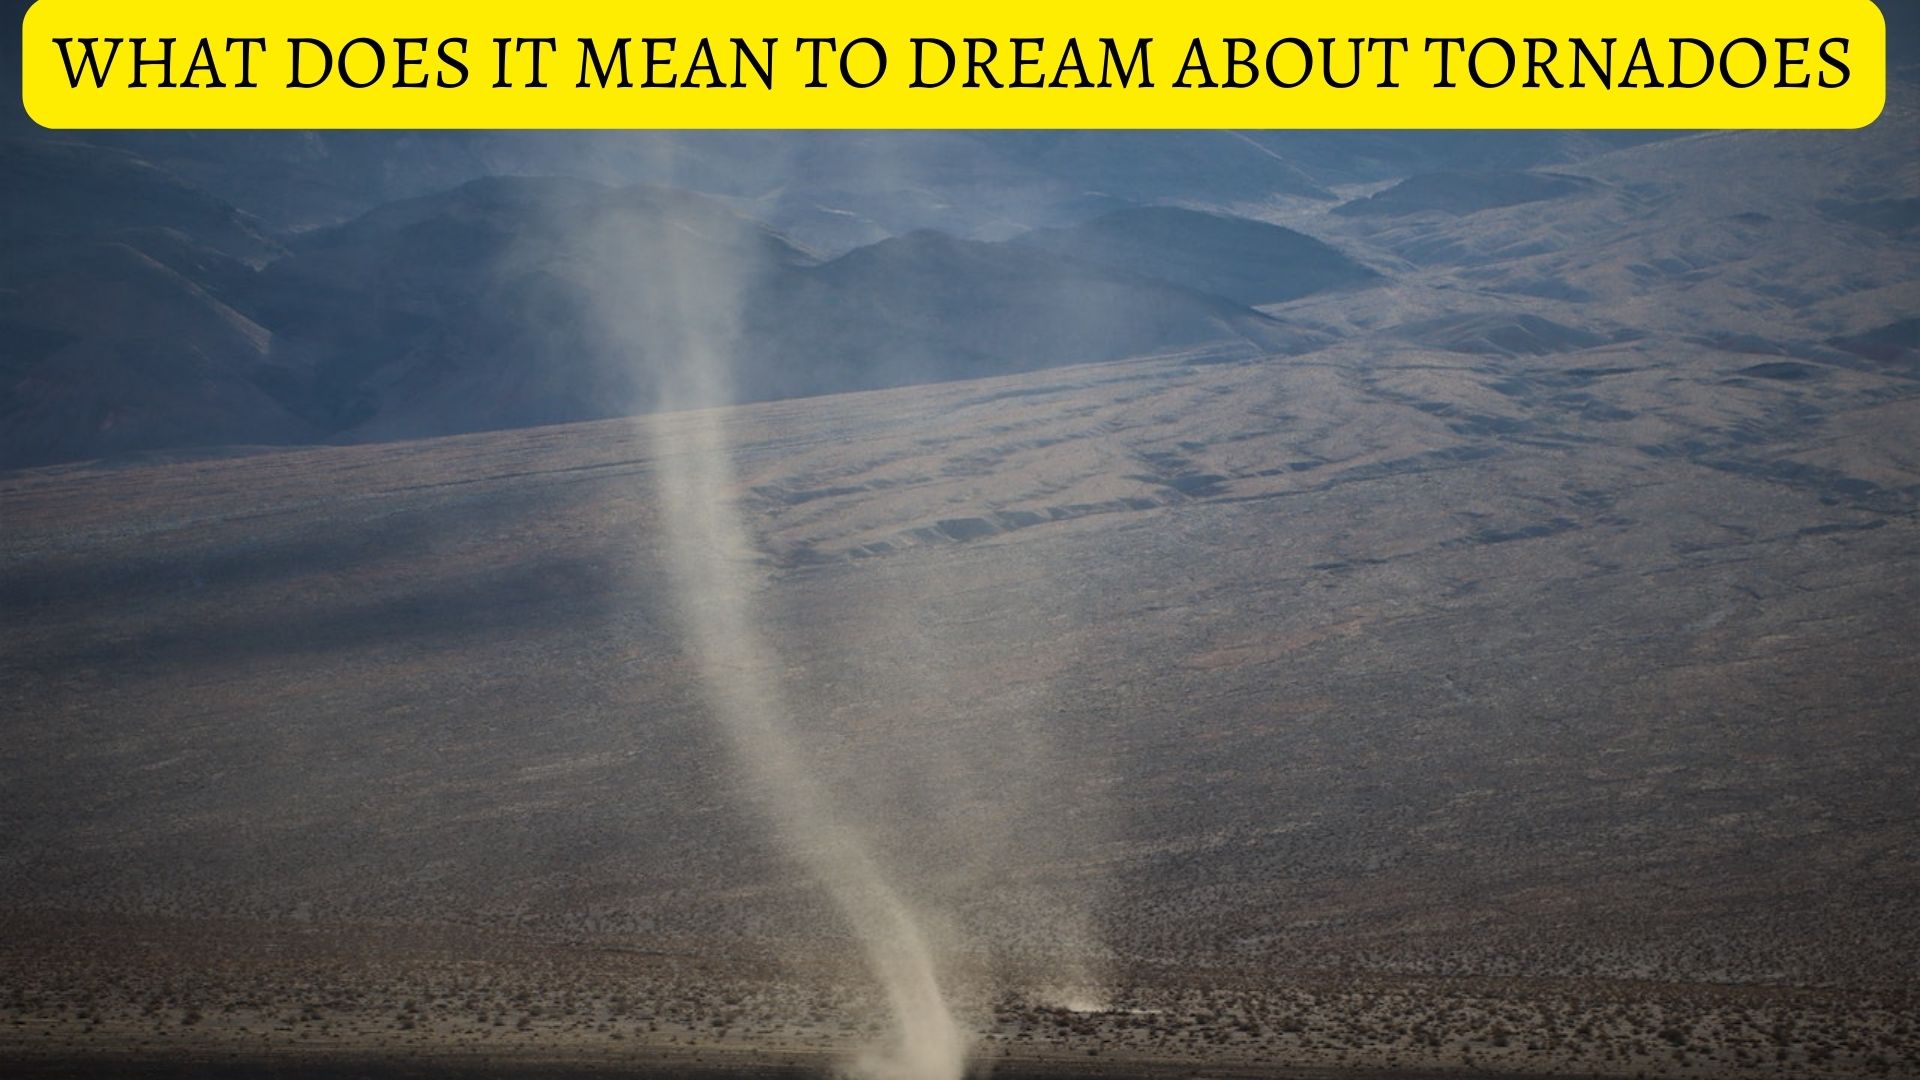 What Does It Mean To Dream About Tornadoes?